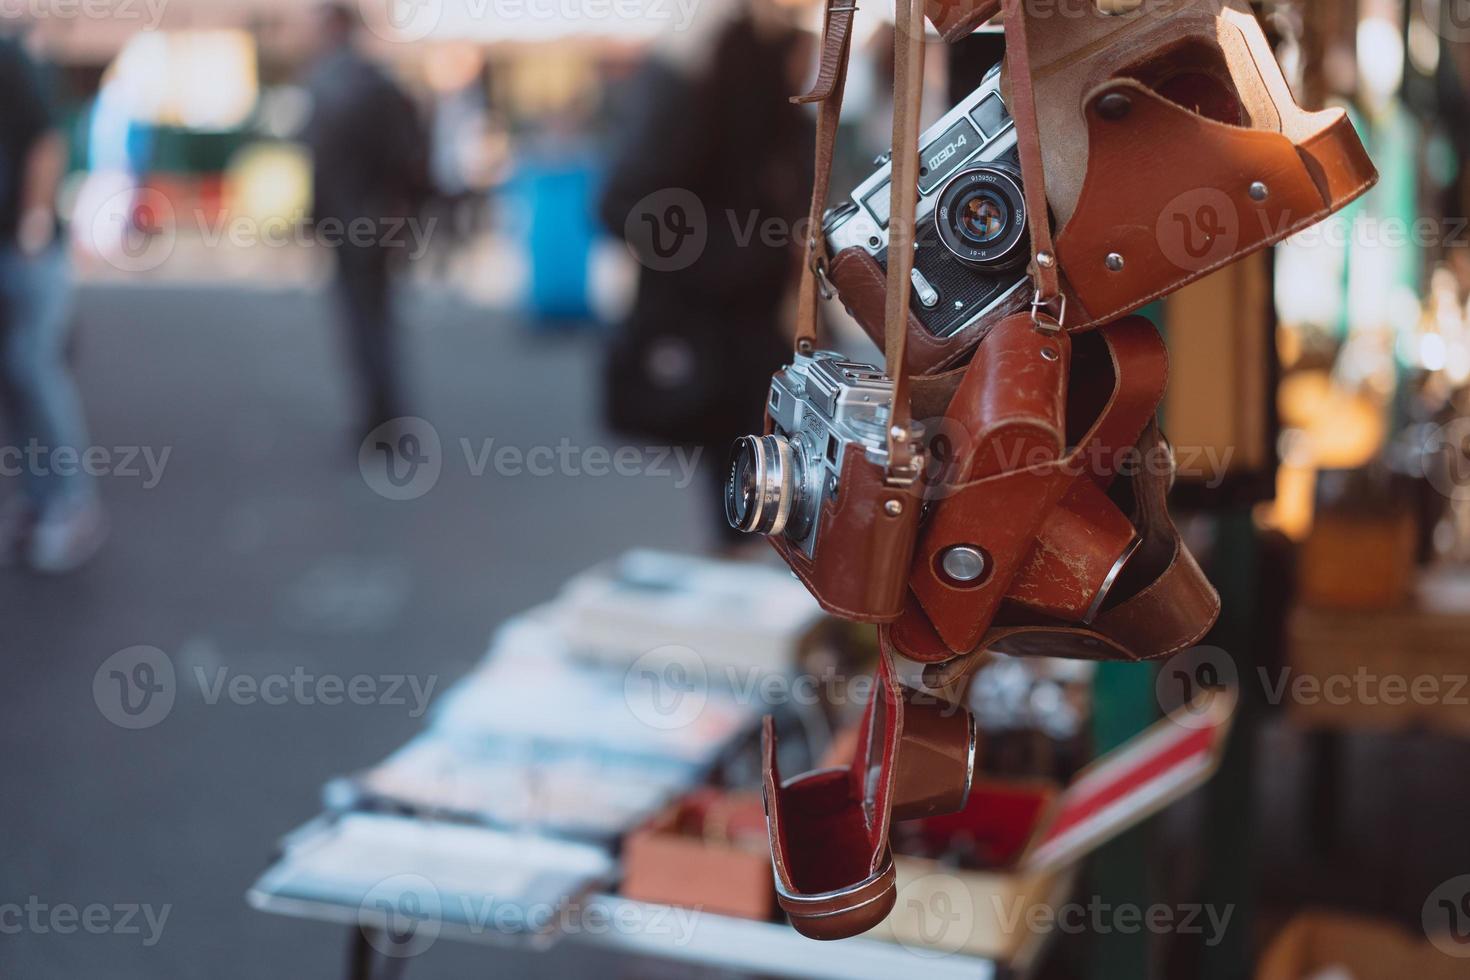 Old cameras are sold at a street market photo